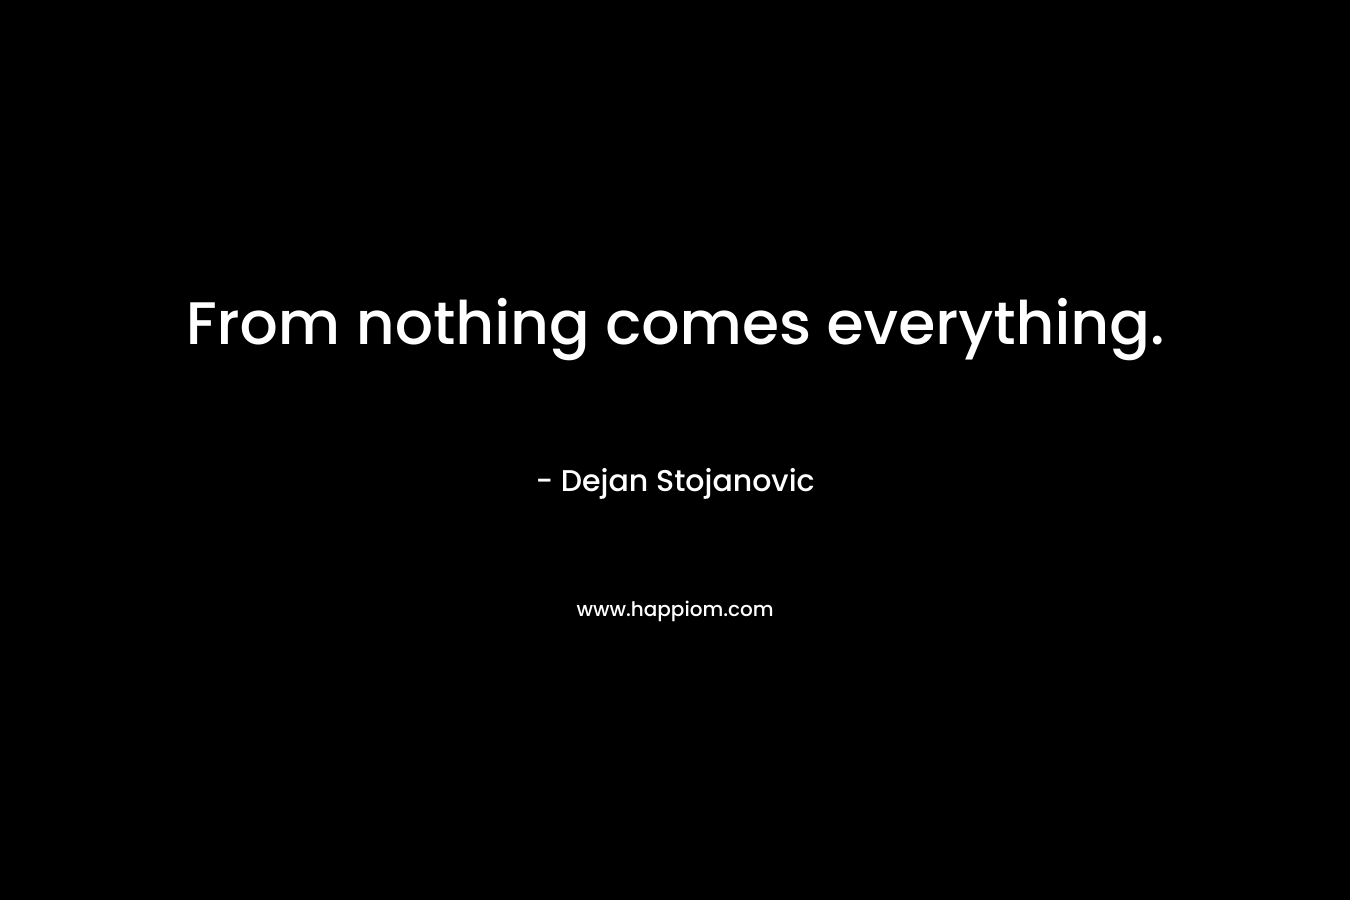 From nothing comes everything.